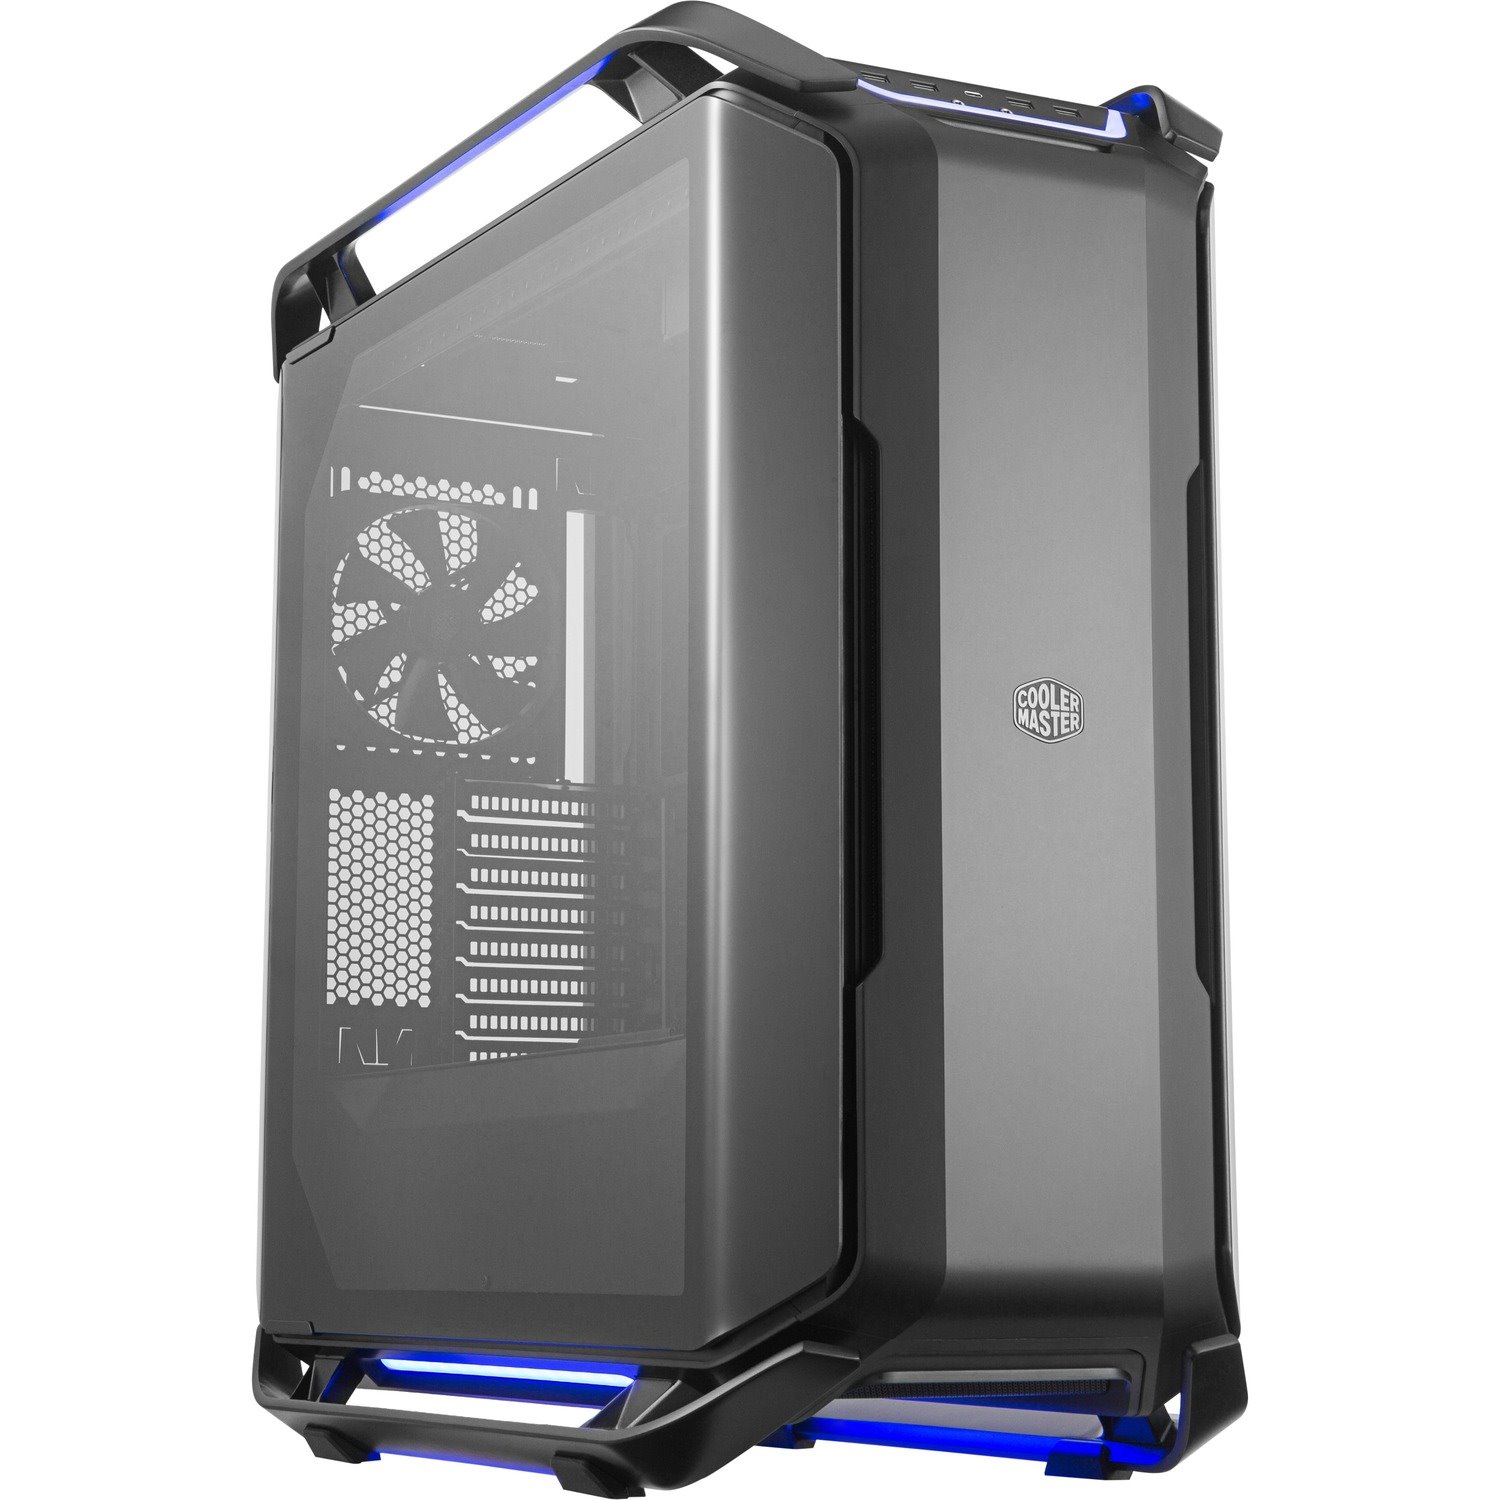 Cooler Master Cosmos MCC-C700P-KG5N-S00 Computer Case - EATX, ATX, Micro ATX, Mini ITX Motherboard Supported - Full-tower - Steel, Tempered Glass - Black